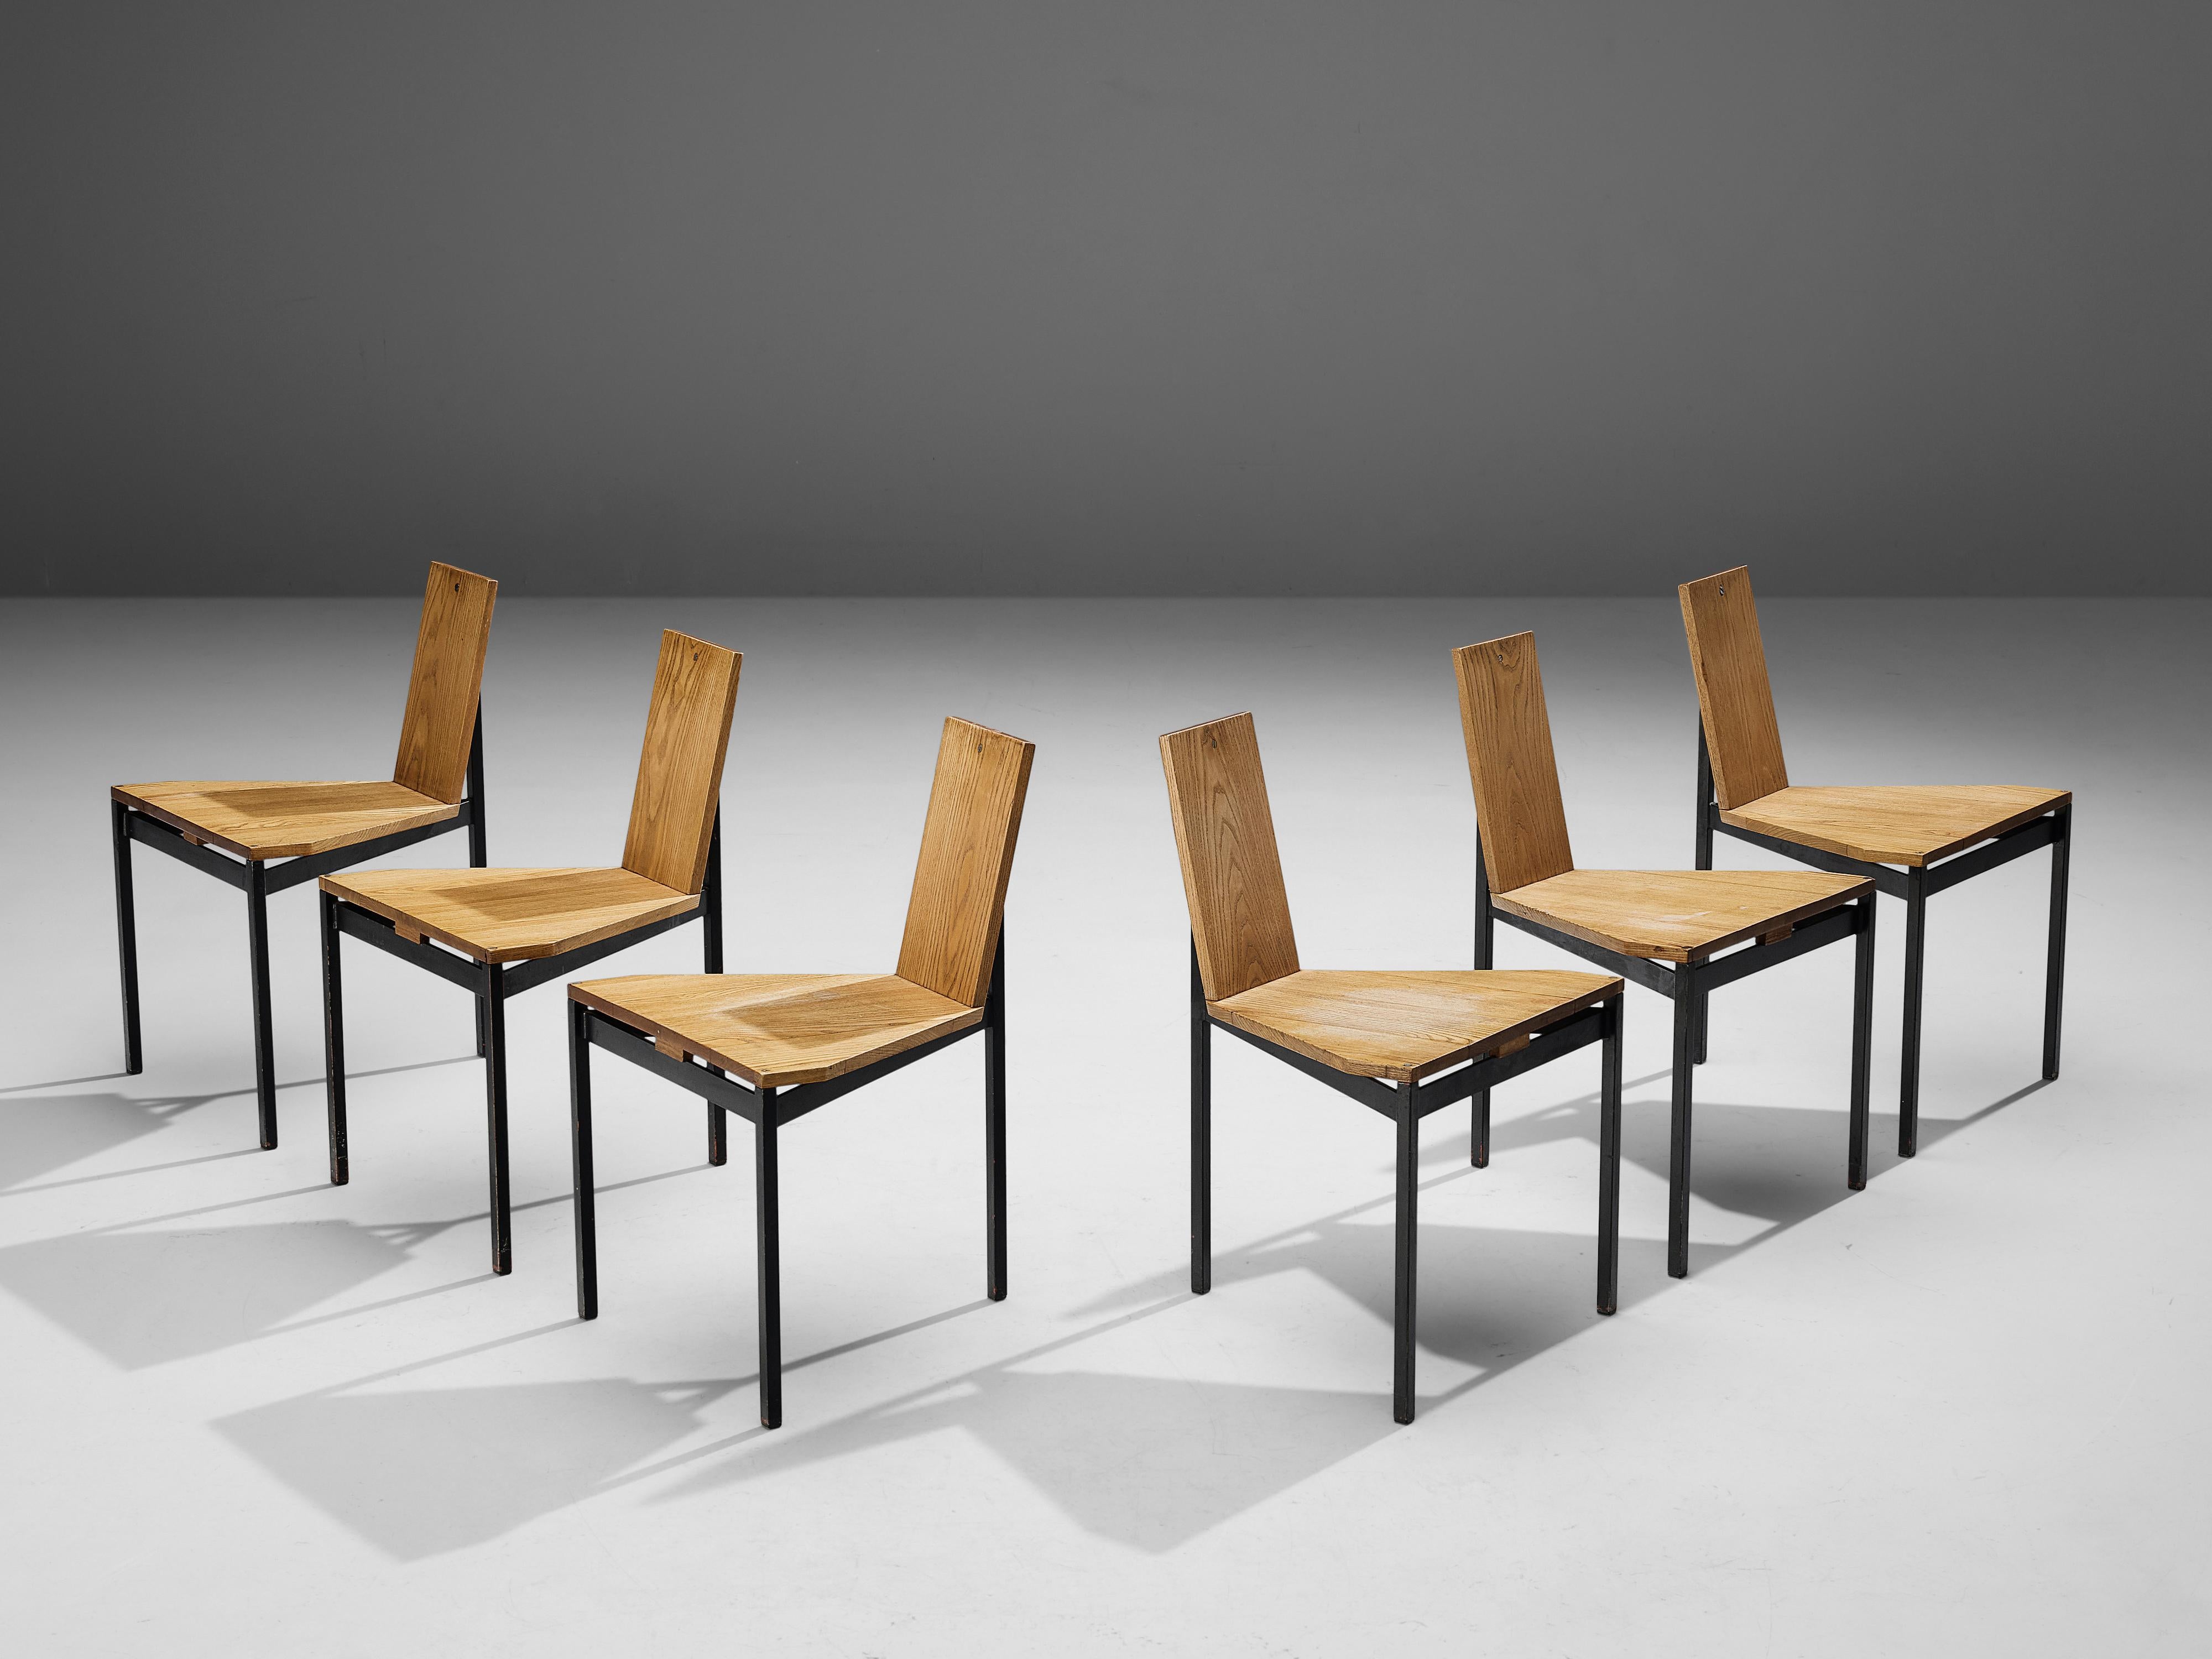 Wim den Boon, set of six dining chairs, ash, lacquered metal, The Netherlands, 1955. 

Exclusive set of six dining chairs designed by Wim den Boon for a Dutch family home, and therefore one of a kind. Each chair features a three legged geometric